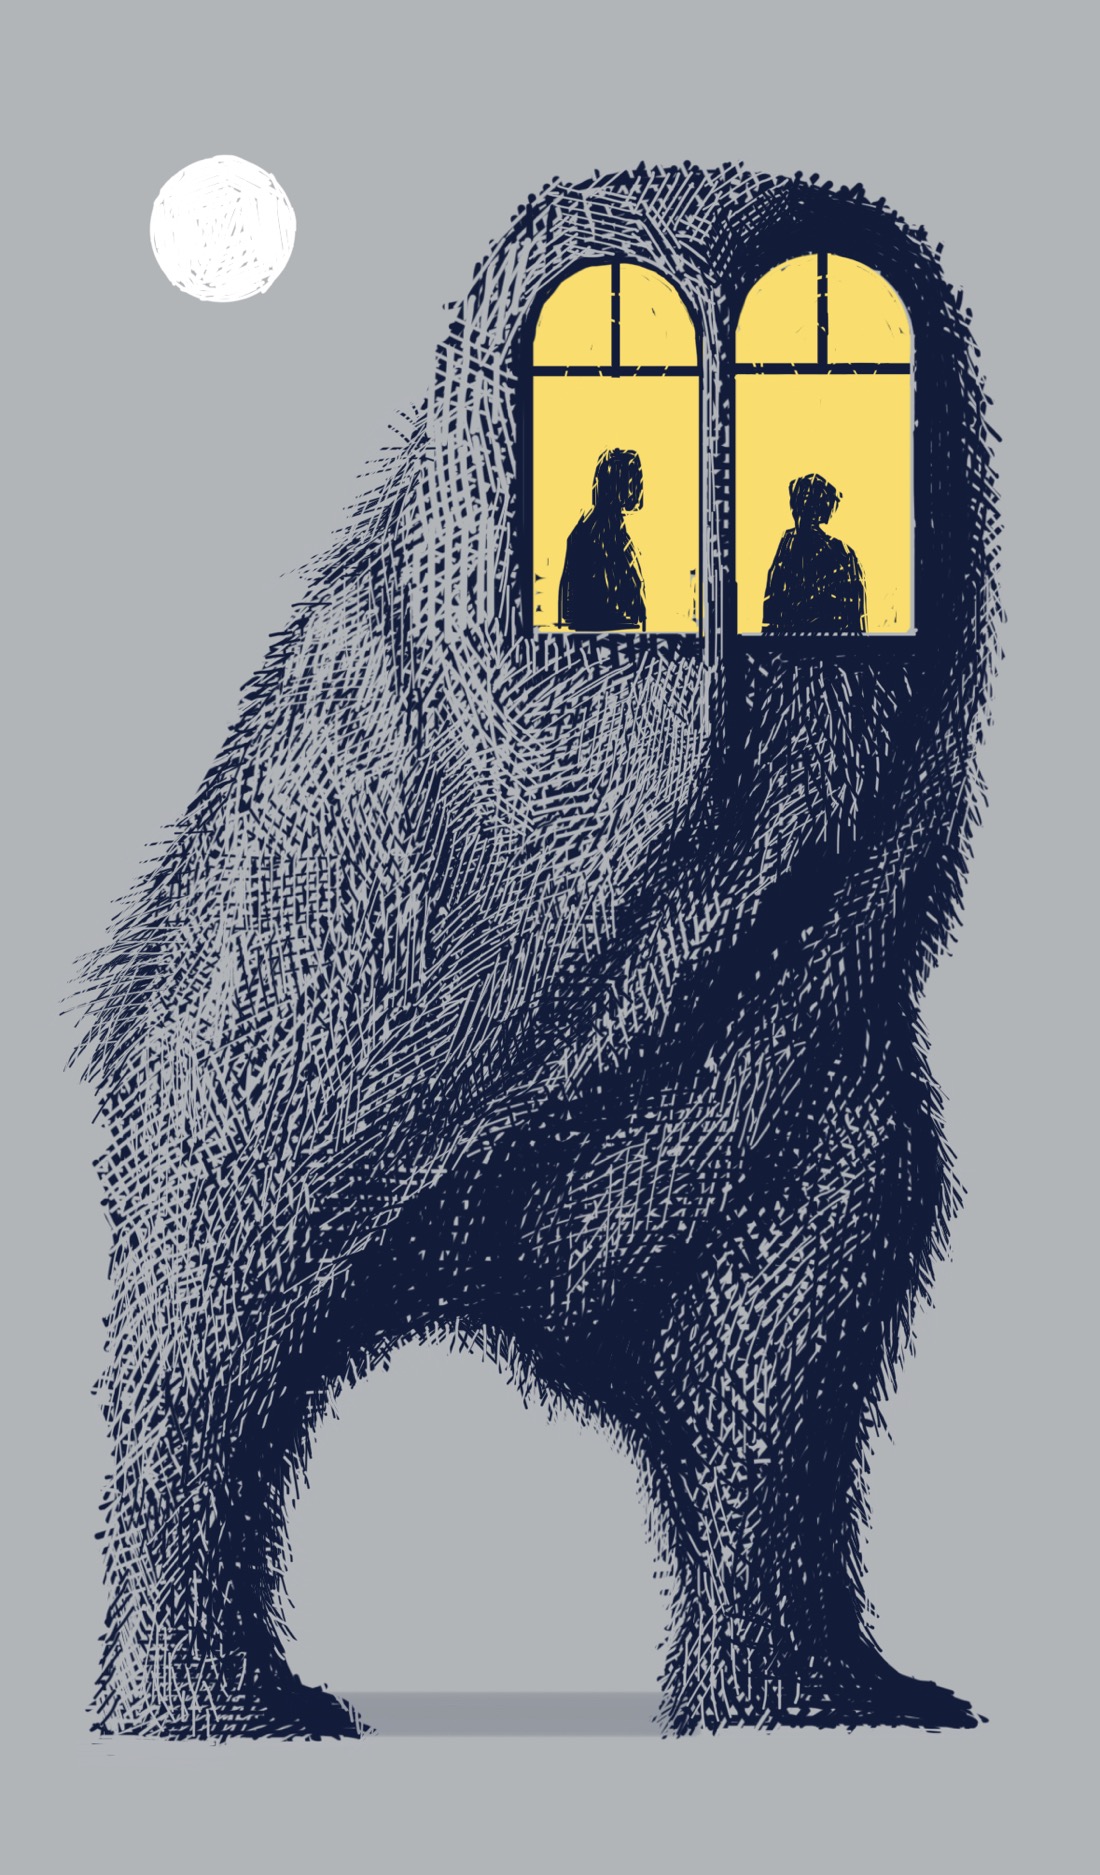 A large furry creature with two large, yellow-lit windows for eyes. Two people stand in the windows; a full moon is above.